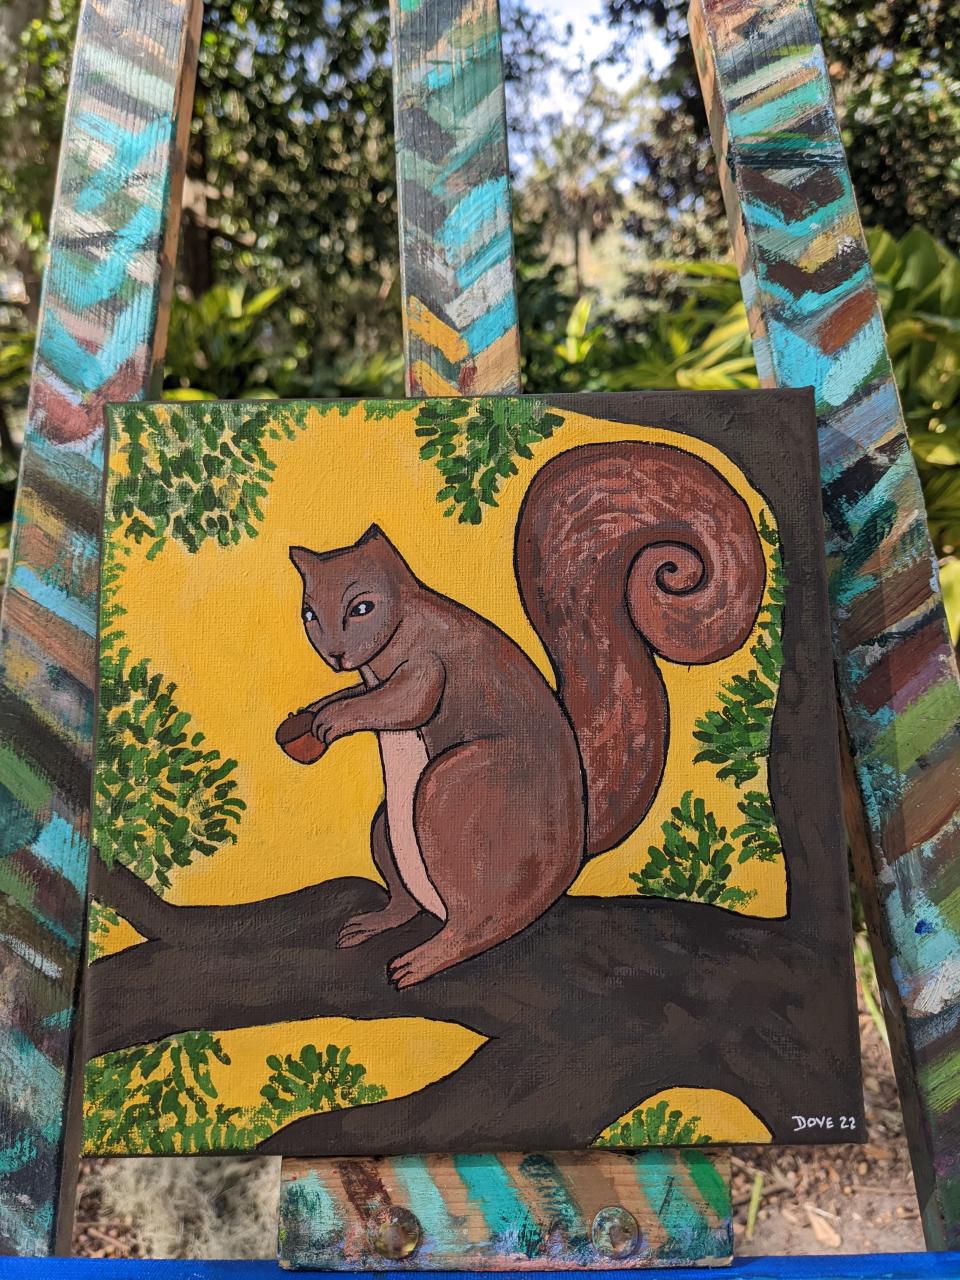 'A squirrel' by Isak Dove